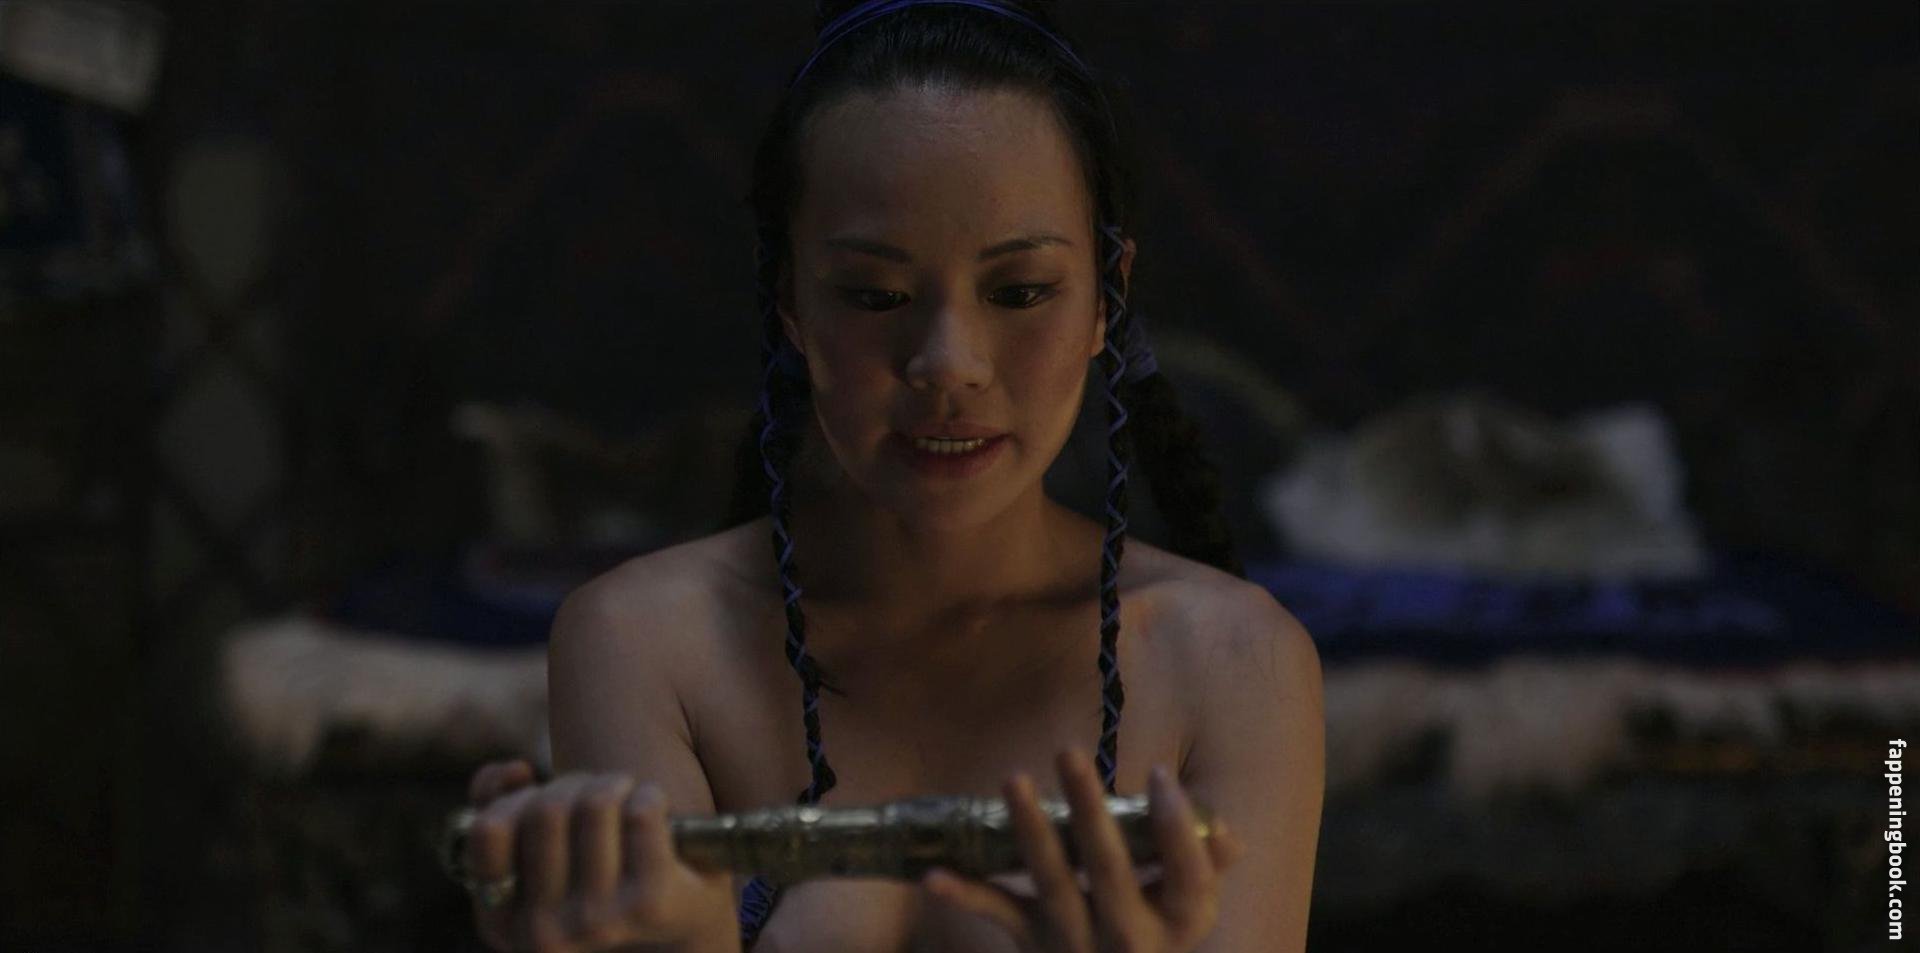 Nude Roles in Movies: Marco Polo (2014-2016), Marco Polo s02e05 (2016) .